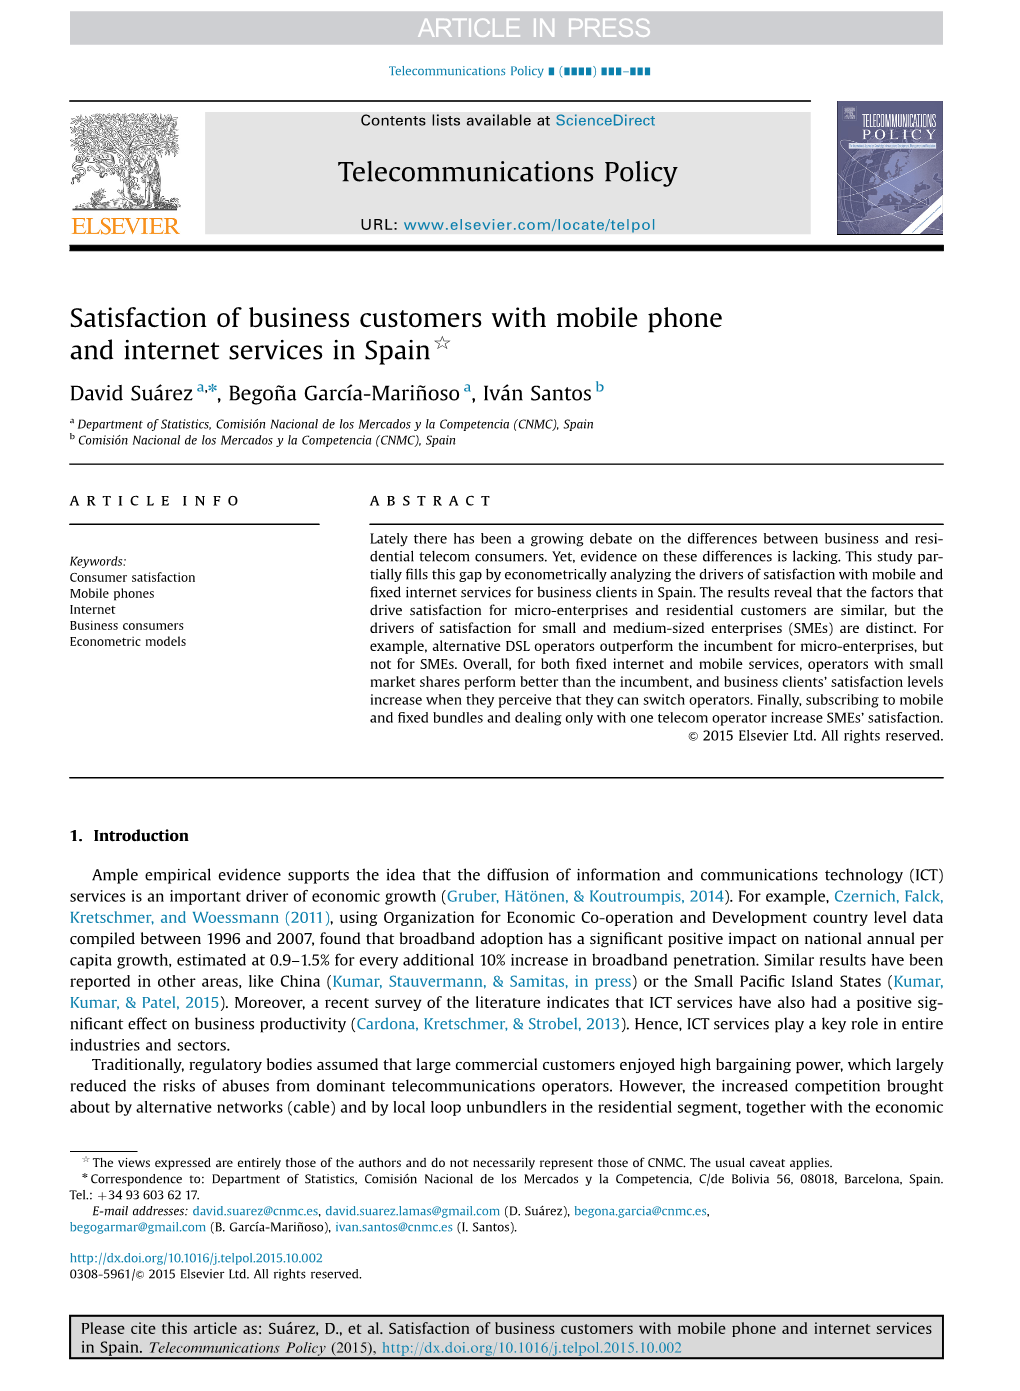 Satisfaction of Business Customers with Mobile Phone and Internet Services in Spain$